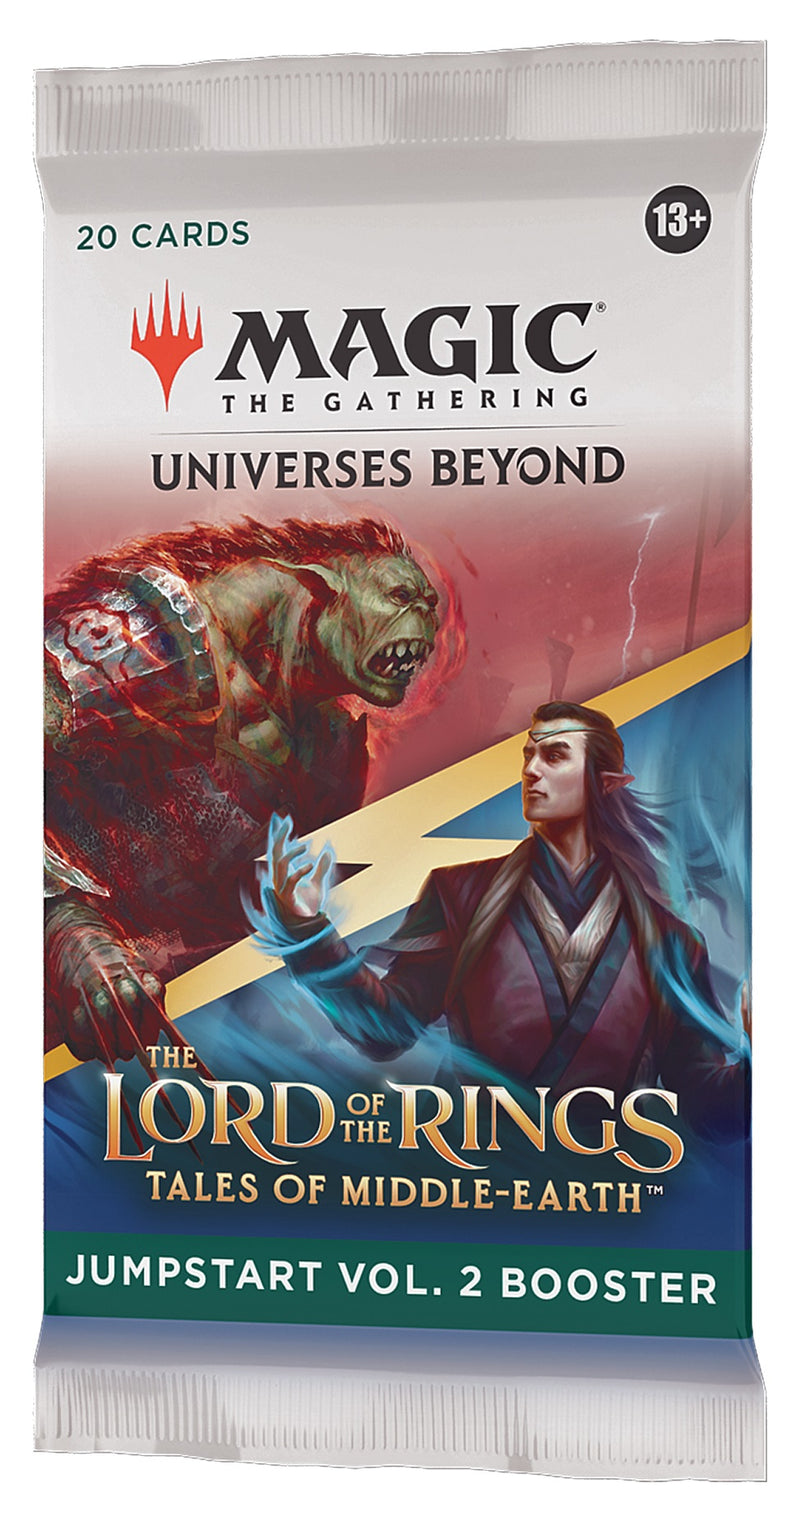 The Lord of the Rings Tales of Middle Earth Jumpstart Vol. 2 Booster Pack